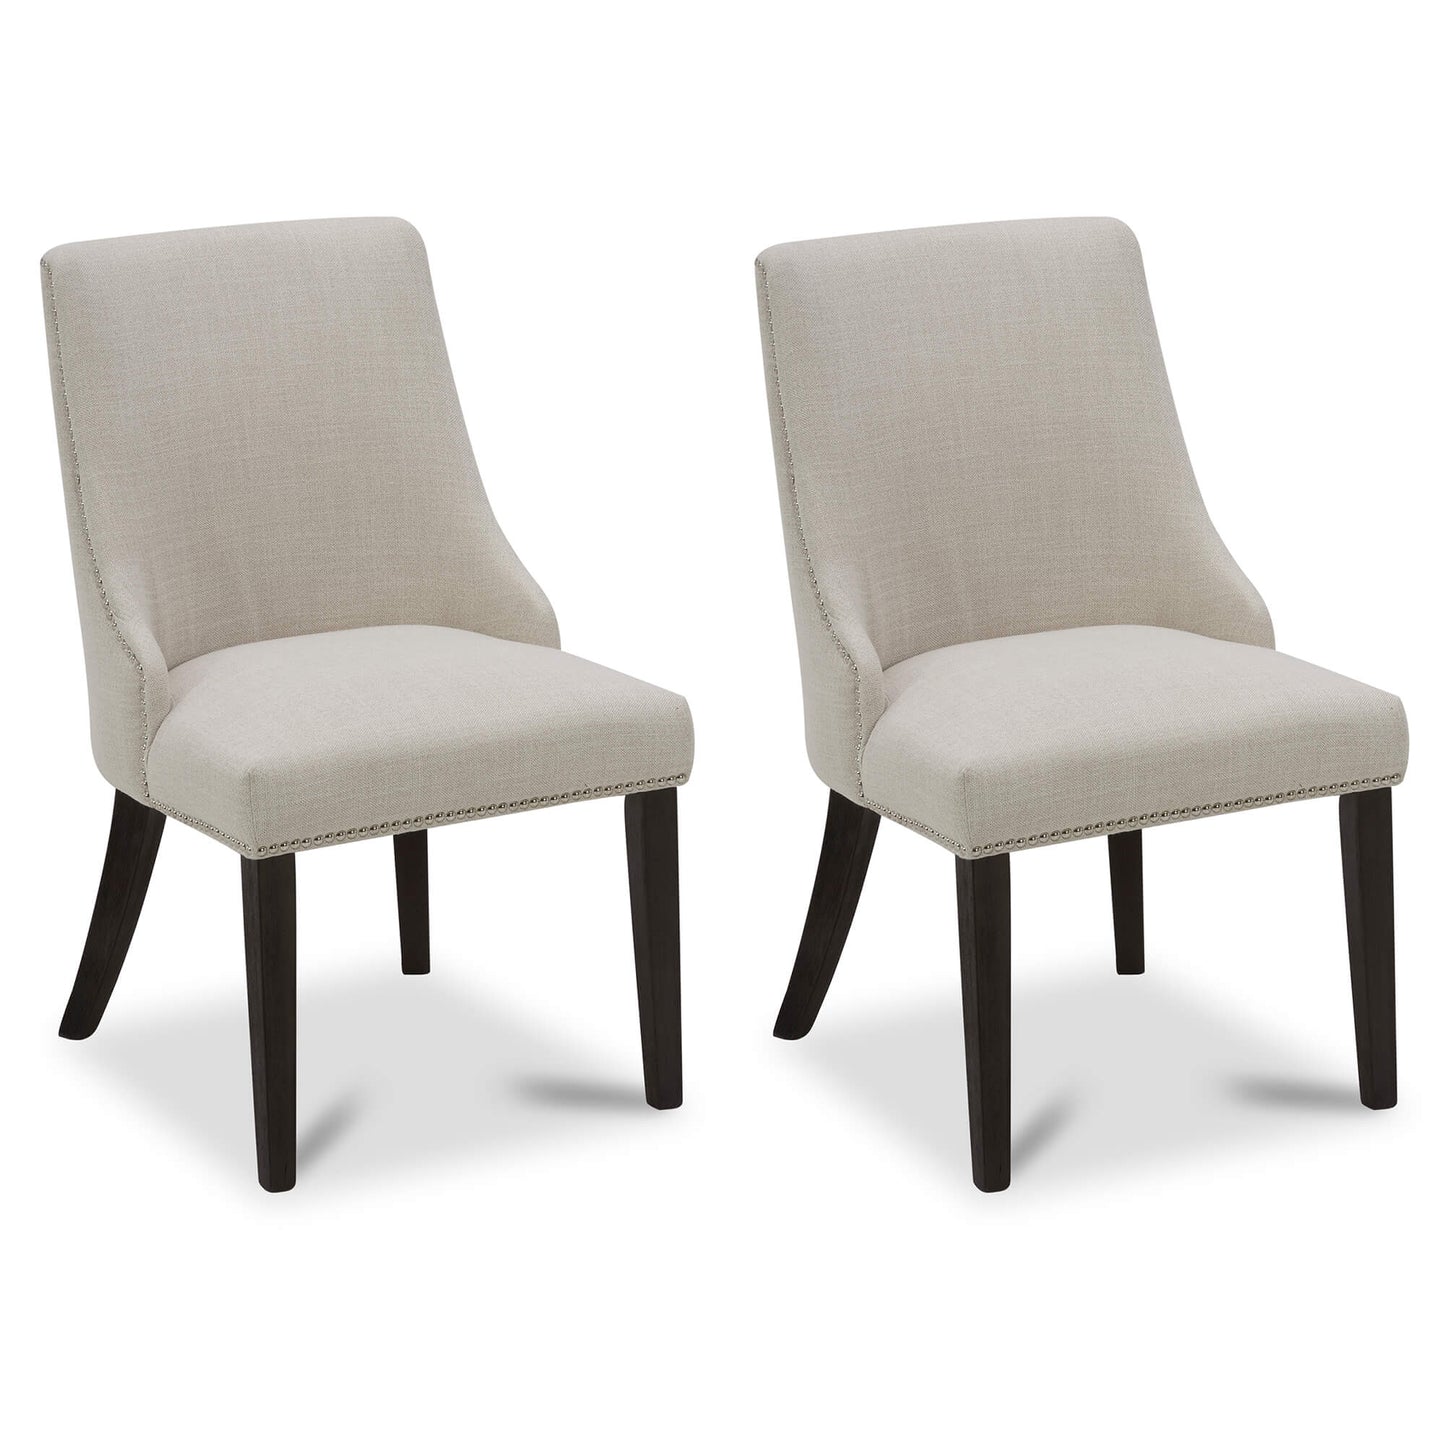 CHITA LIVING-Asher Upholstered Dining Chair with Nailhead Trim (Set of 2)-Dining Chairs-Fabric-Linen-